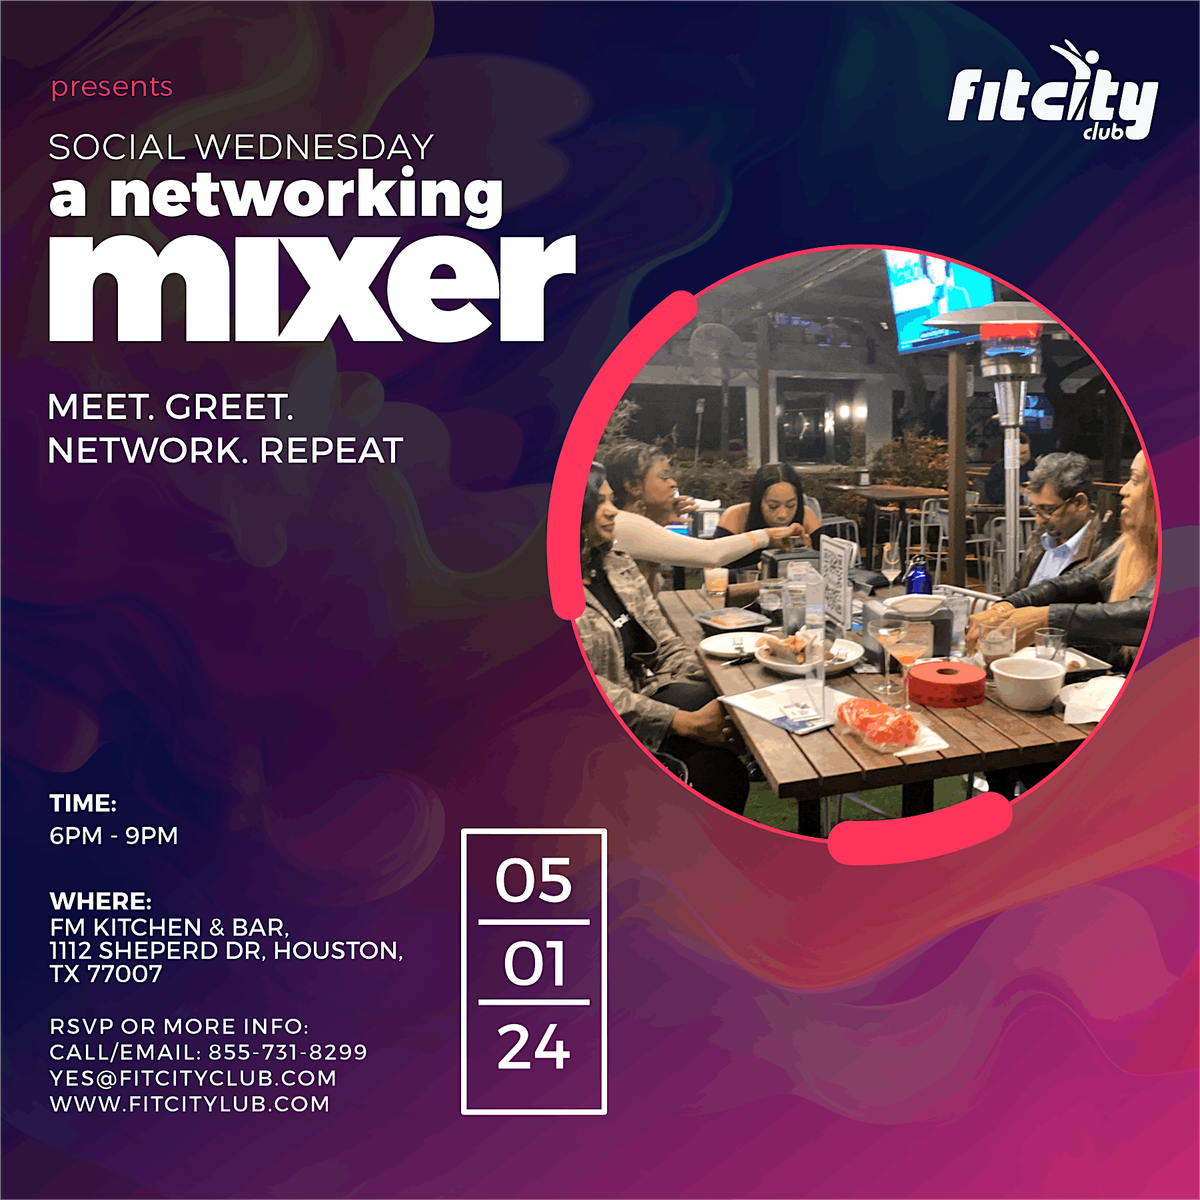 FitCity Presents Social Wednesday - A Networking Mixer